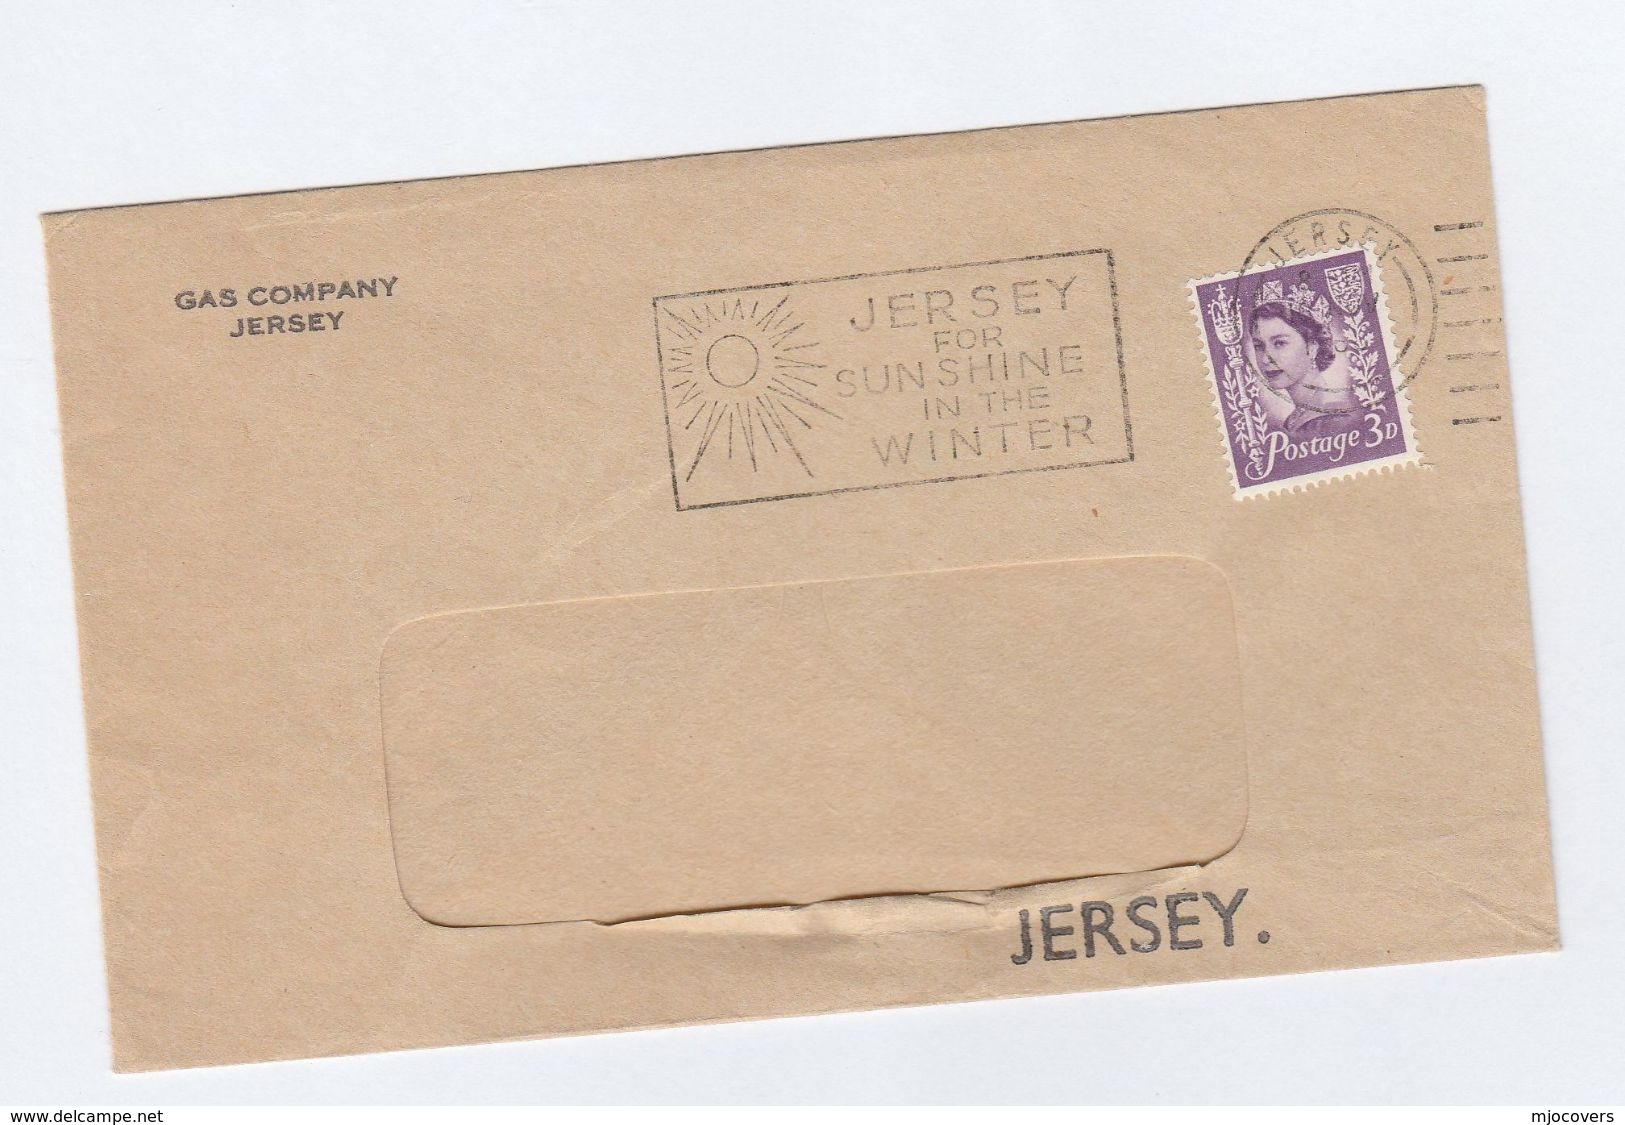 1968 JERSEY GAS Co COVER SLOGAN Pmk Jersey For SUNSHINE IN WINTER, Energy Stamps - Gaz